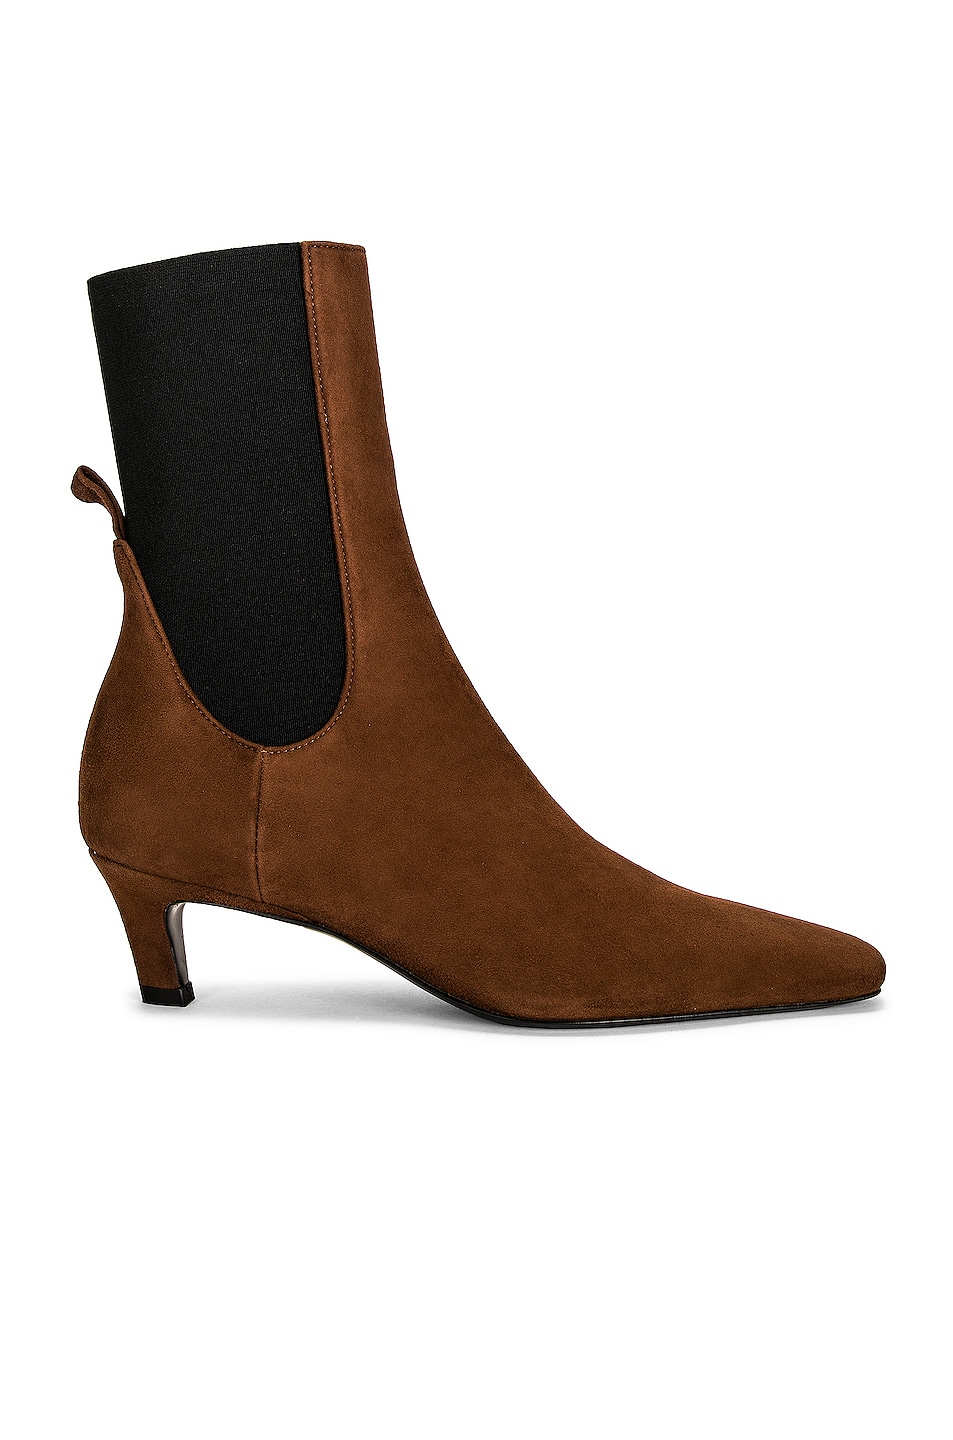 Image 1 of Toteme The Mid Heel Boot in Chocolate Brown